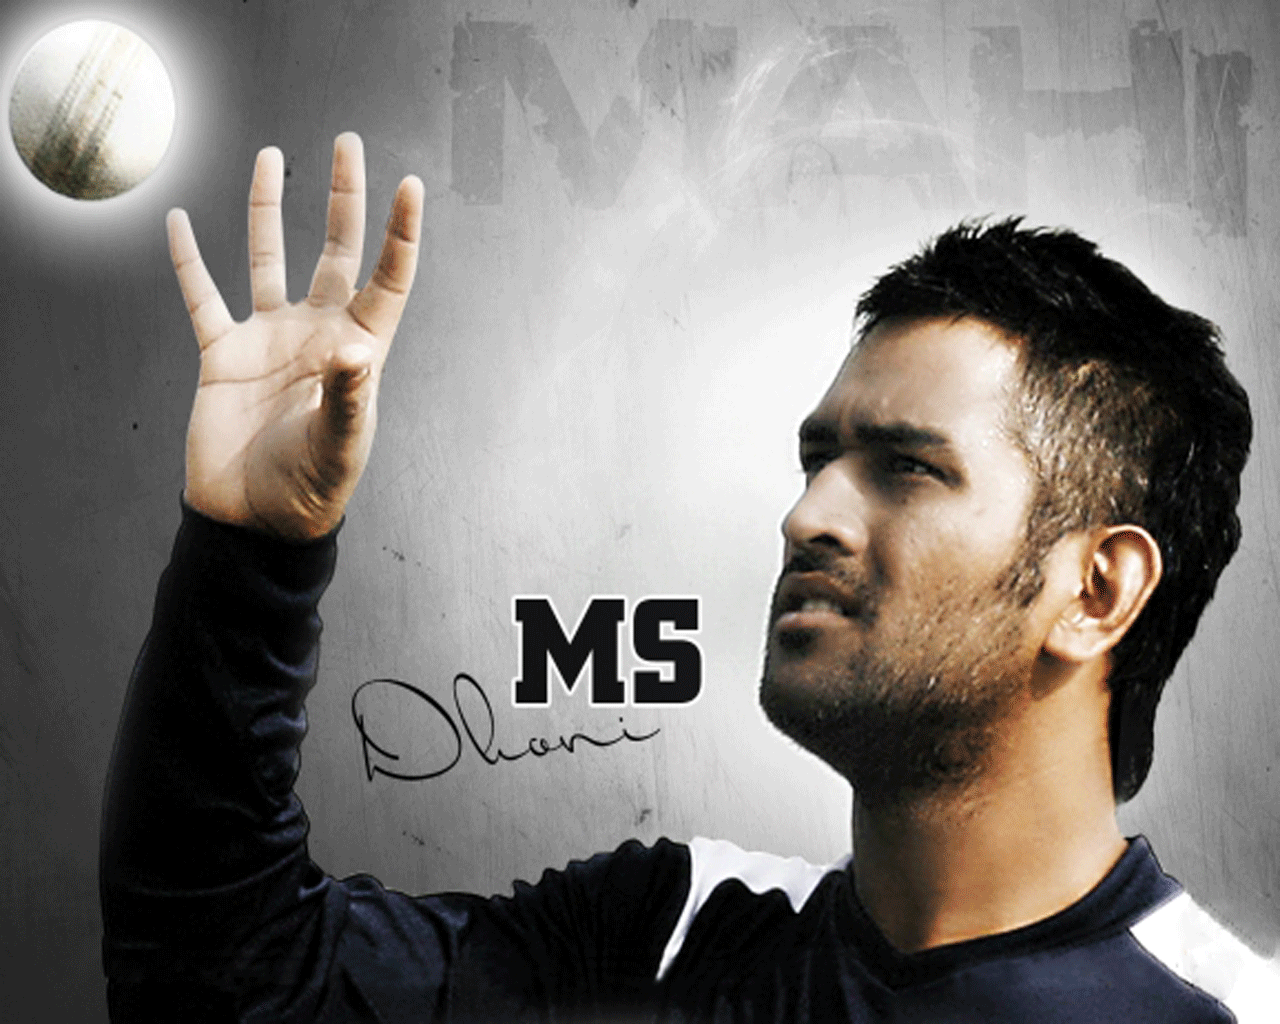 ... HD Wallpapers For Desktop | Download MS Dhoni Latest Wallpapers | Best